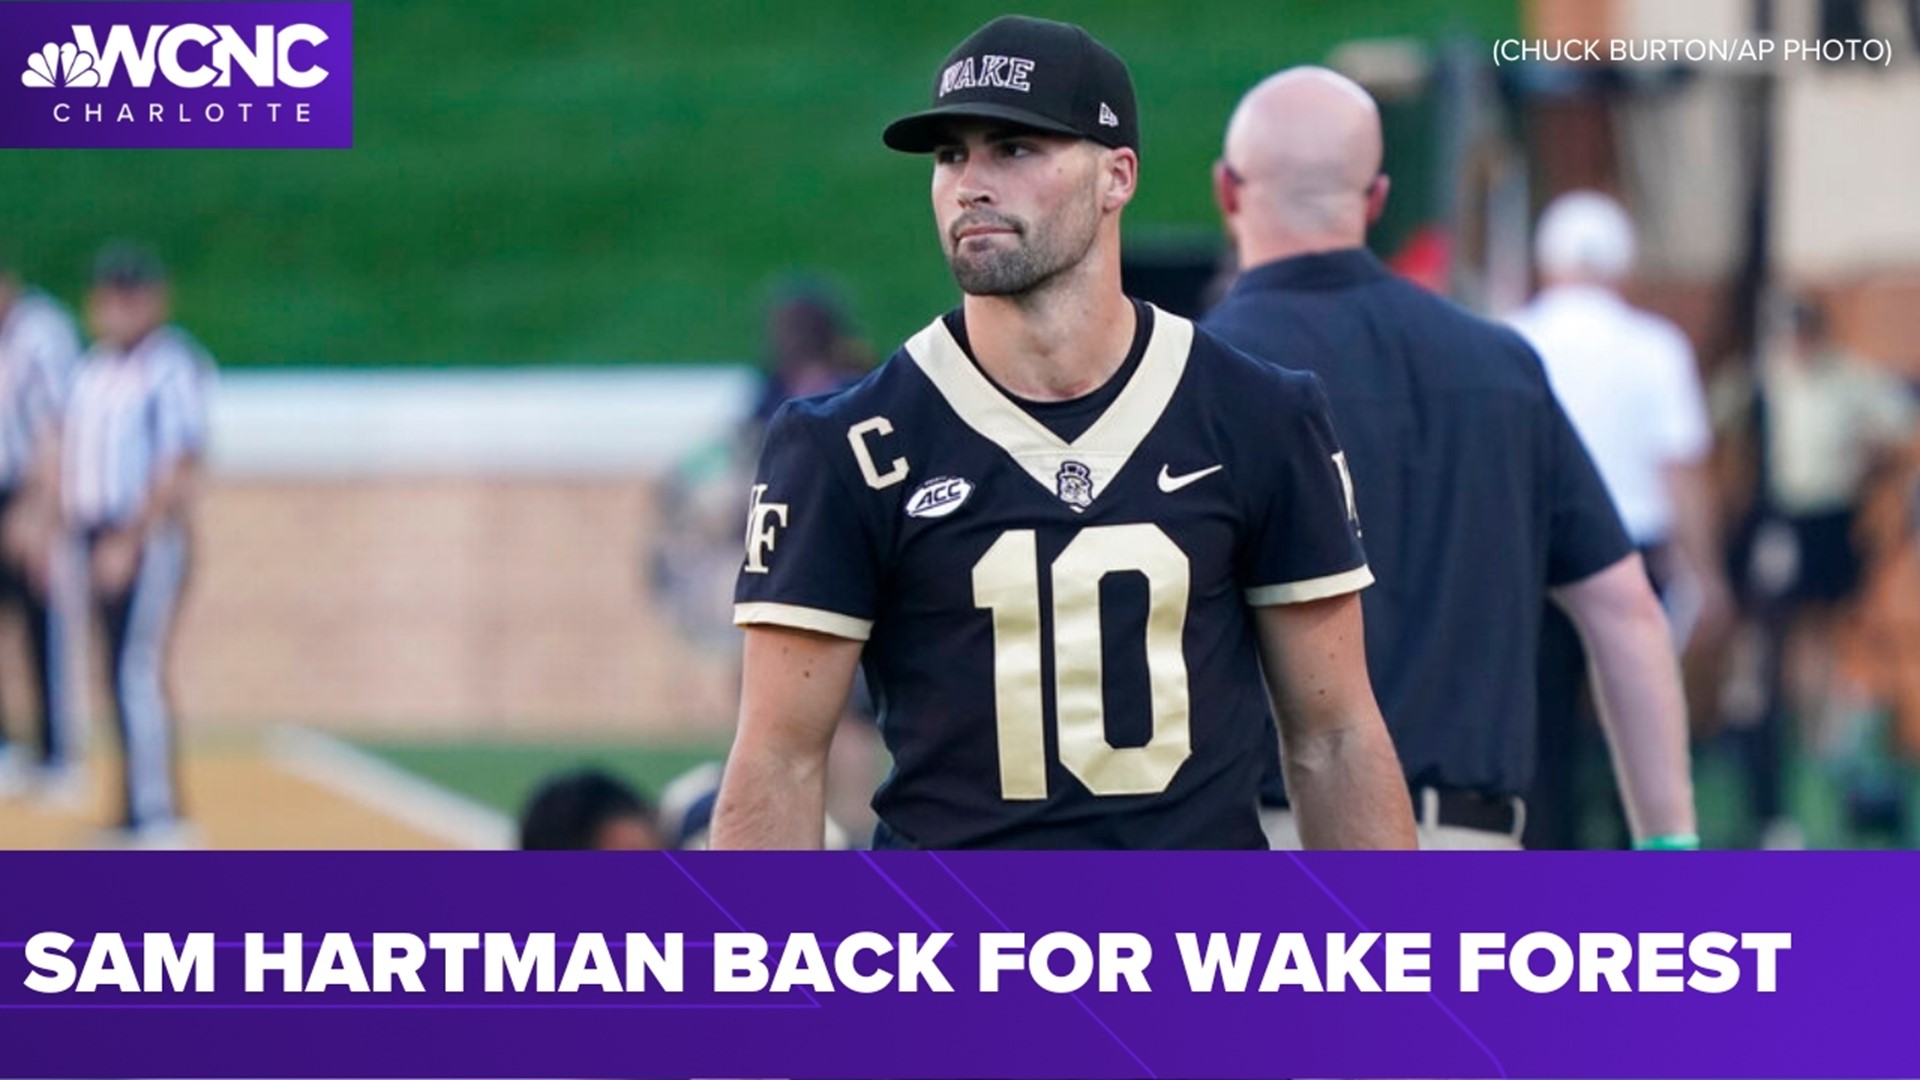 Wake Forest announced Charlotte native Sam Hartman has been cleared to play football after undergoing treatment for a blood clot.